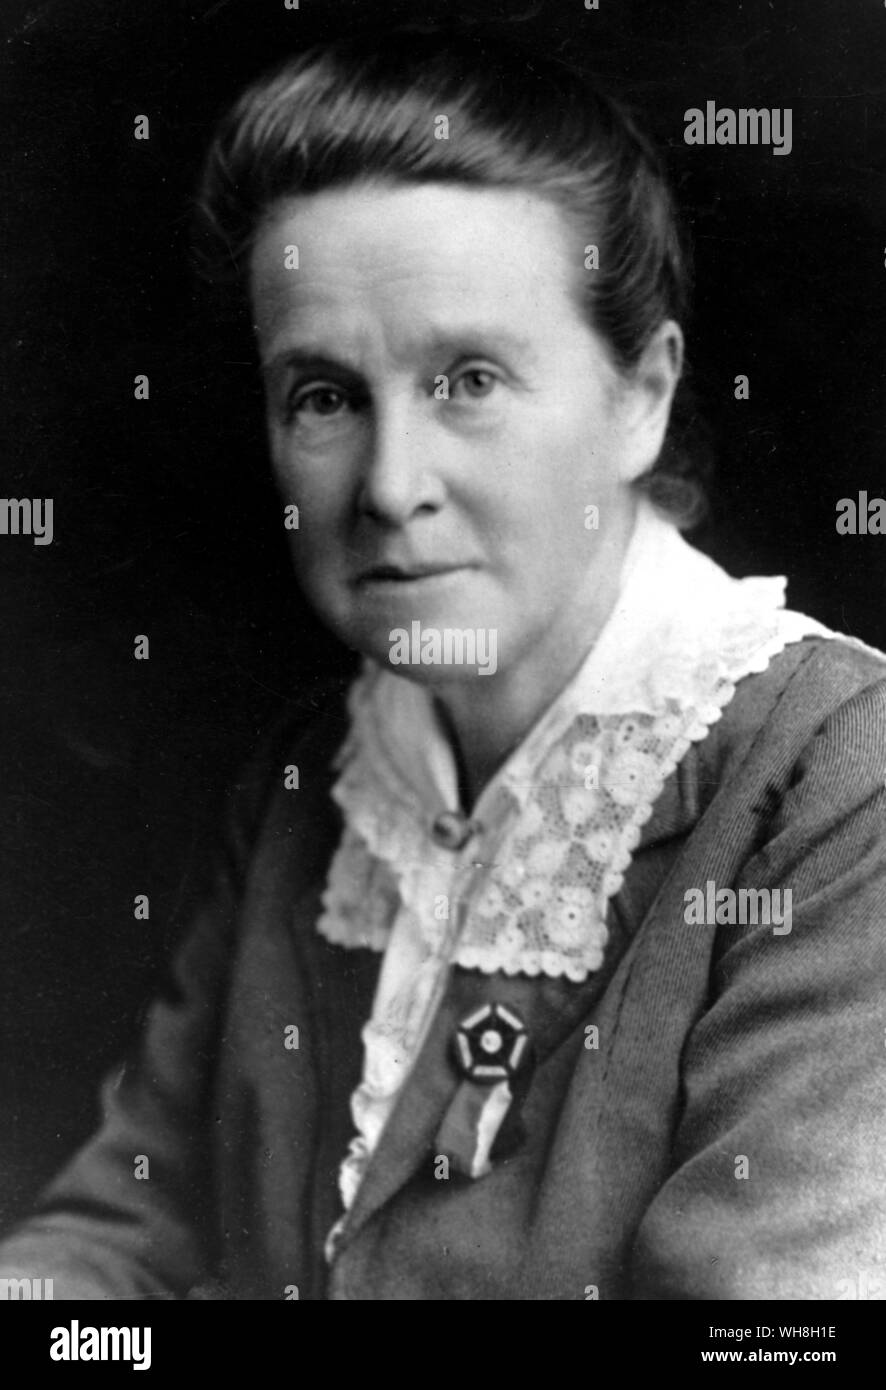 Dame Millicent Fawcett (1847-1929). Pioneer British Non-Militant Suffragist. She was the only pioneer suffragist who lived to see her ideals realized. Stock Photo